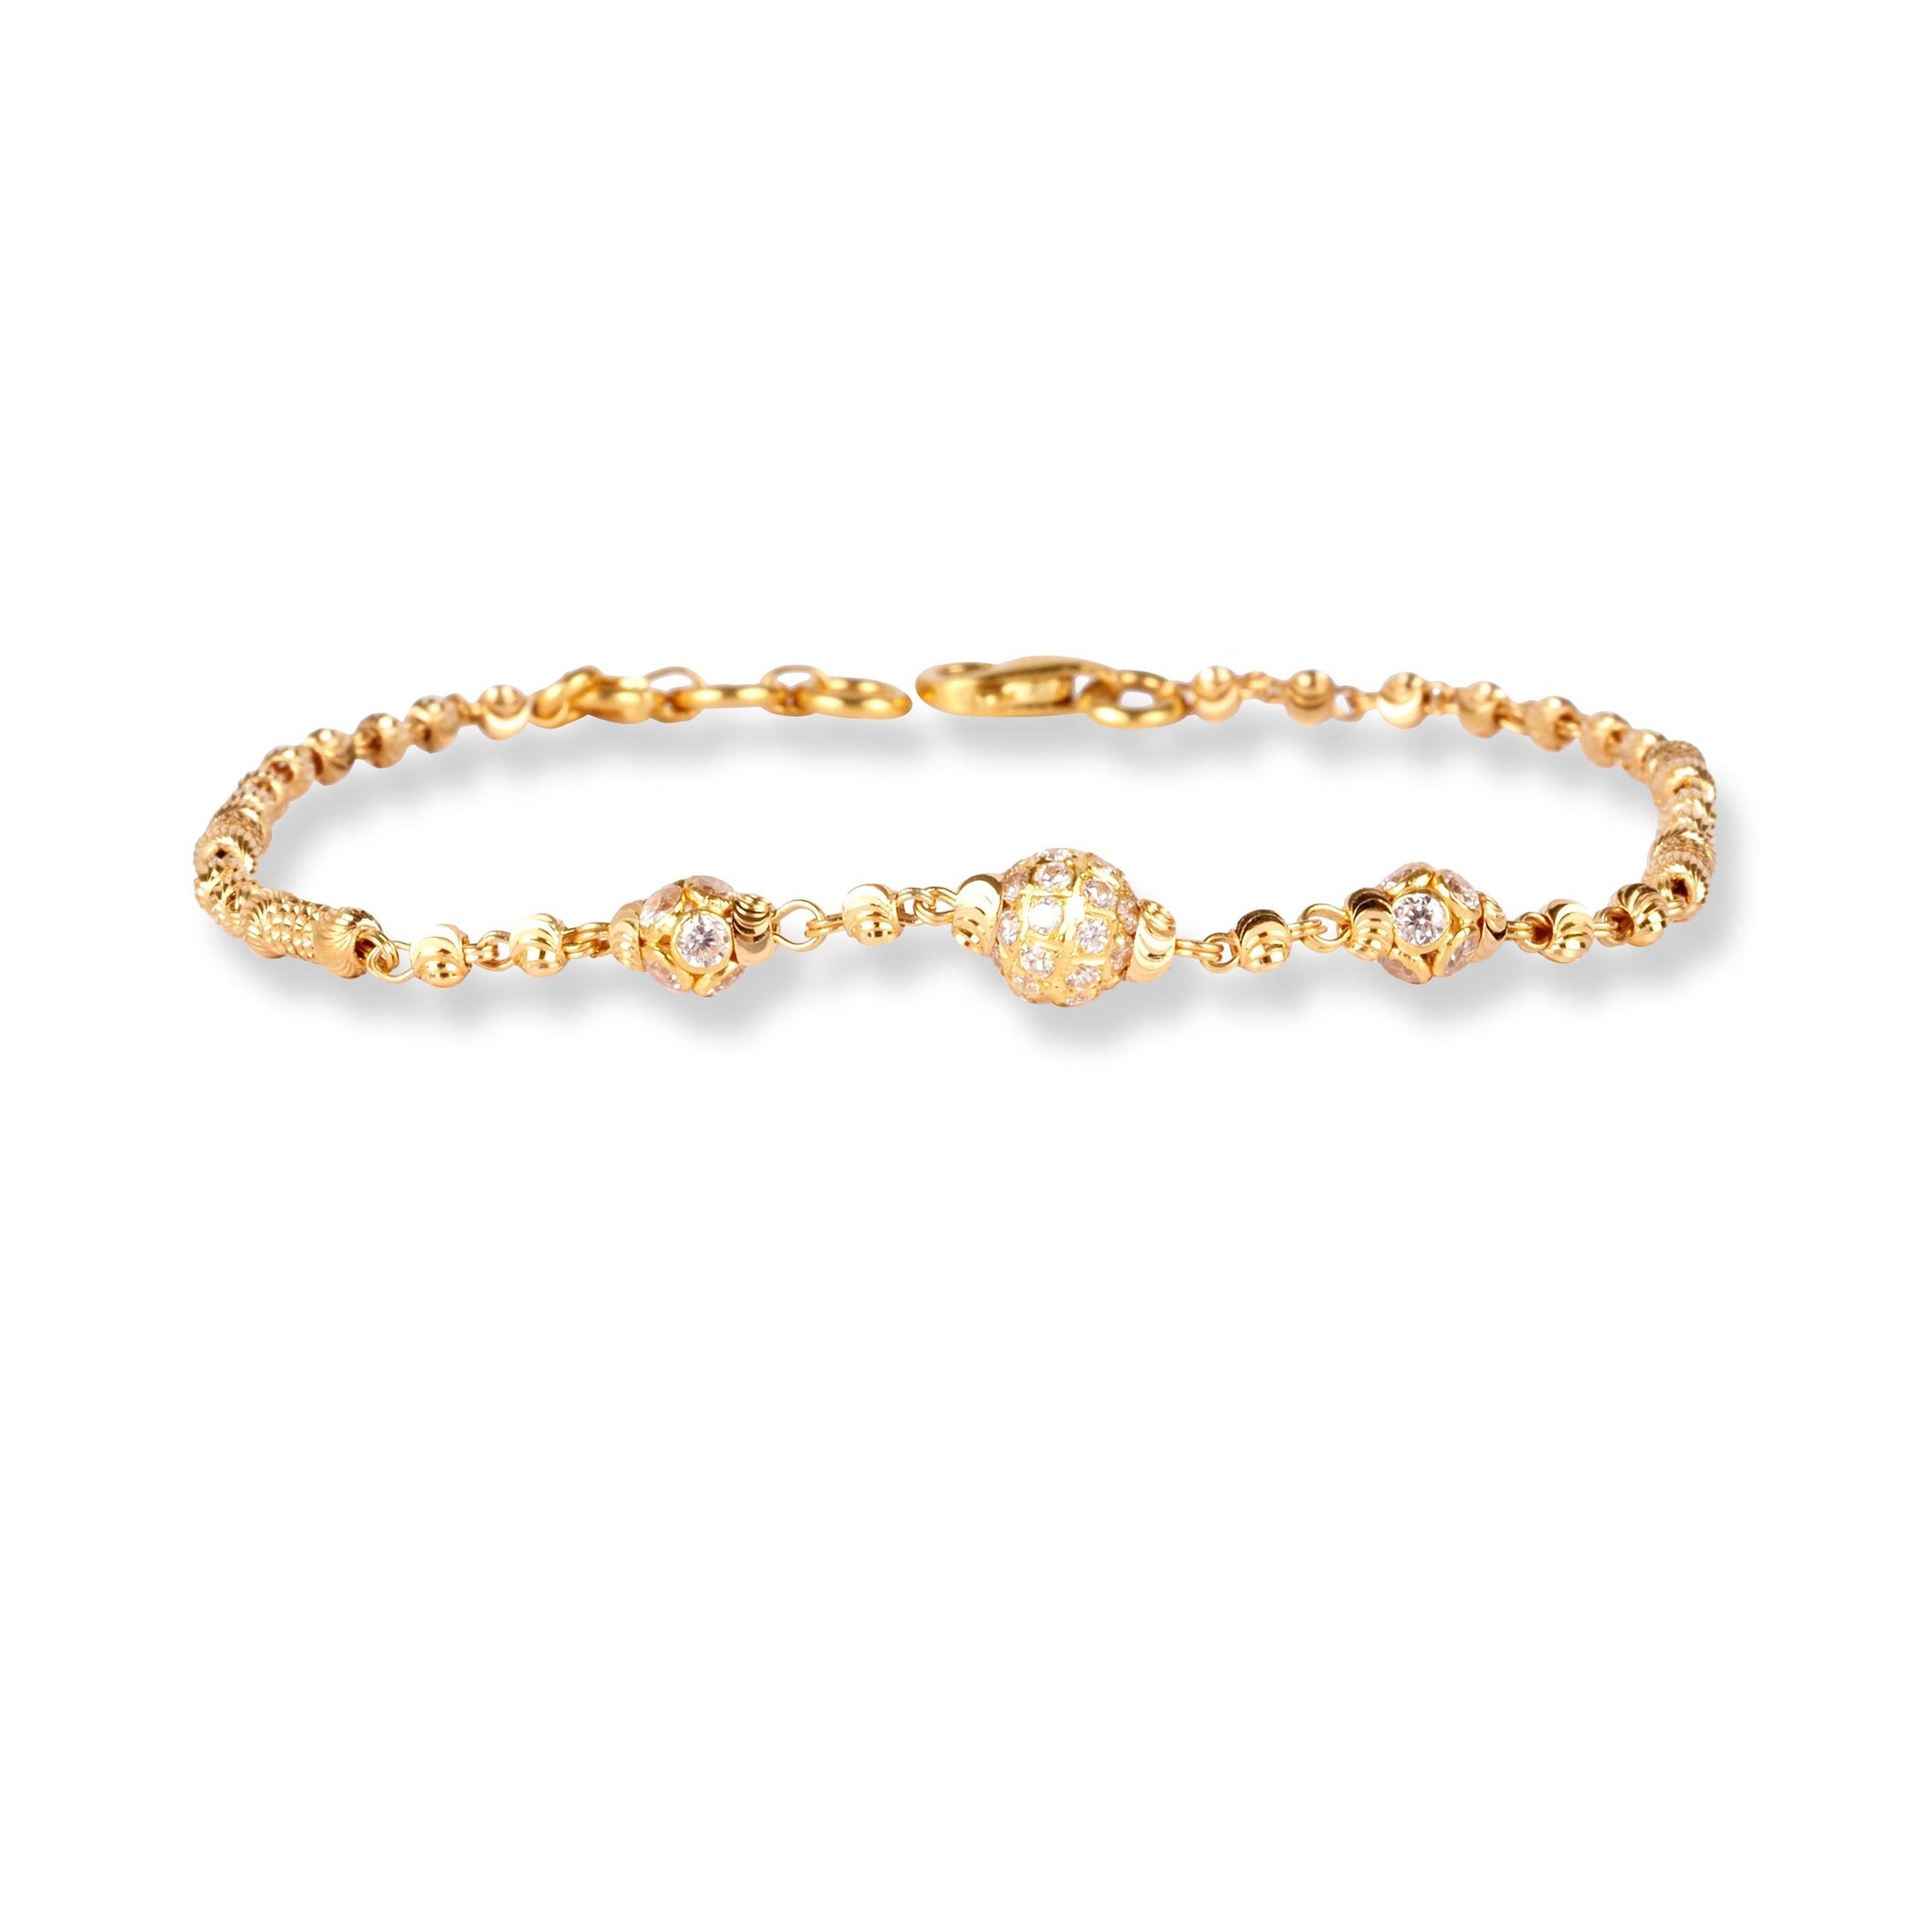 22ct Gold Bracelet with Diamond Cut Beads and Cubic Zirconia Stones LBR-7131